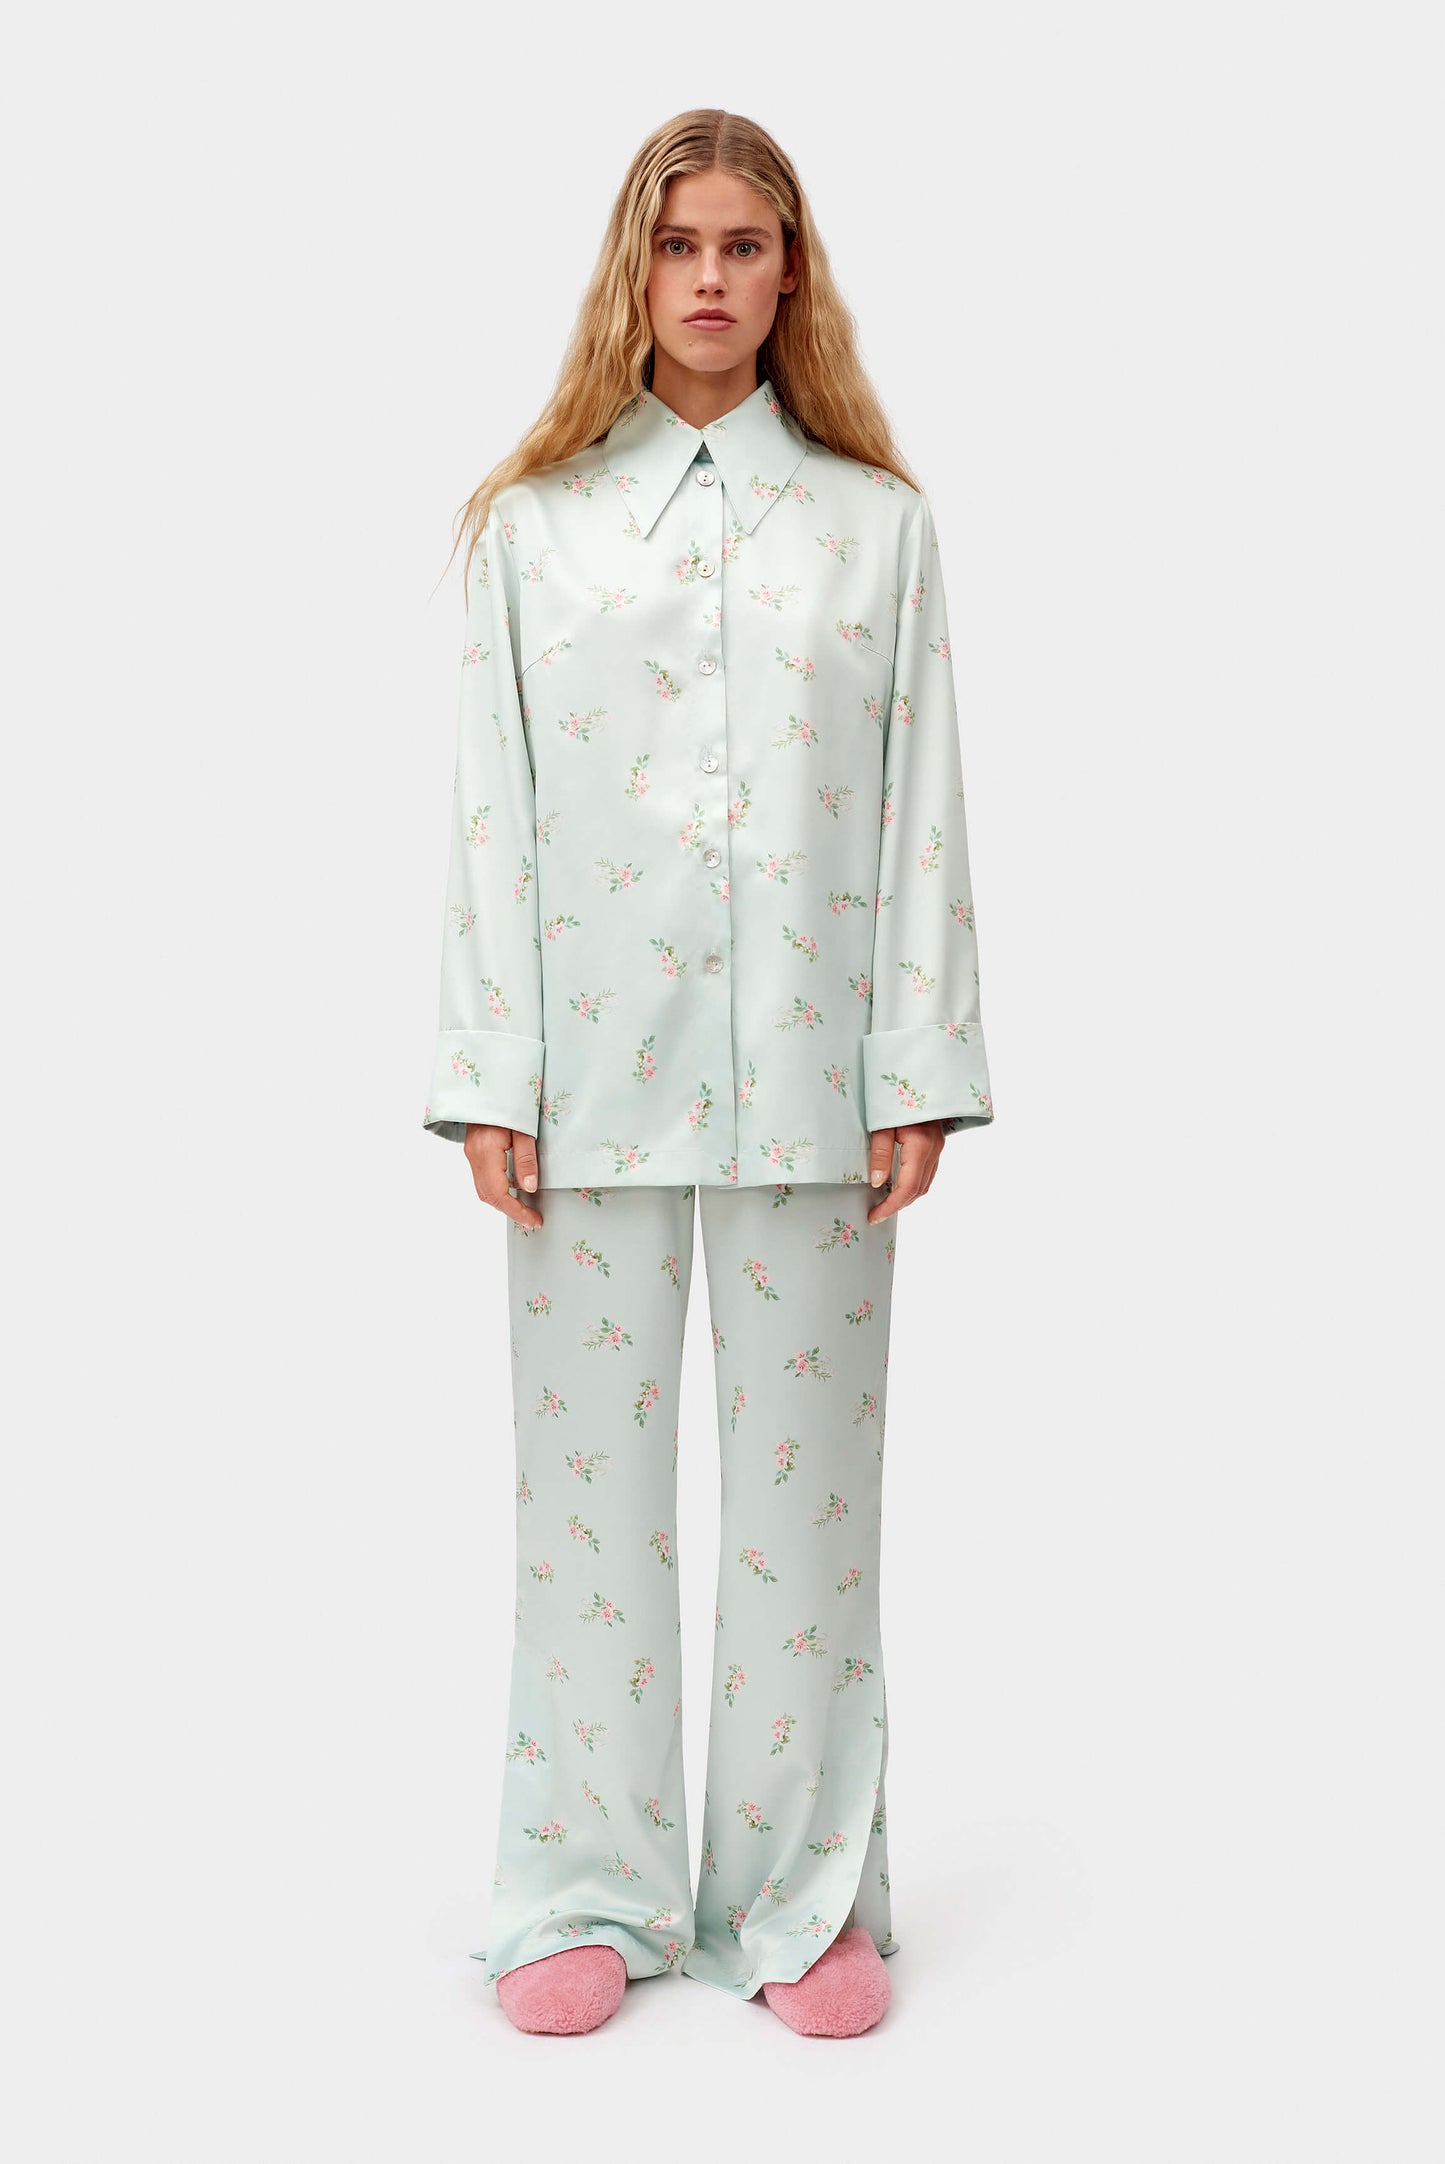 Blossom Printed Shirt in Mint